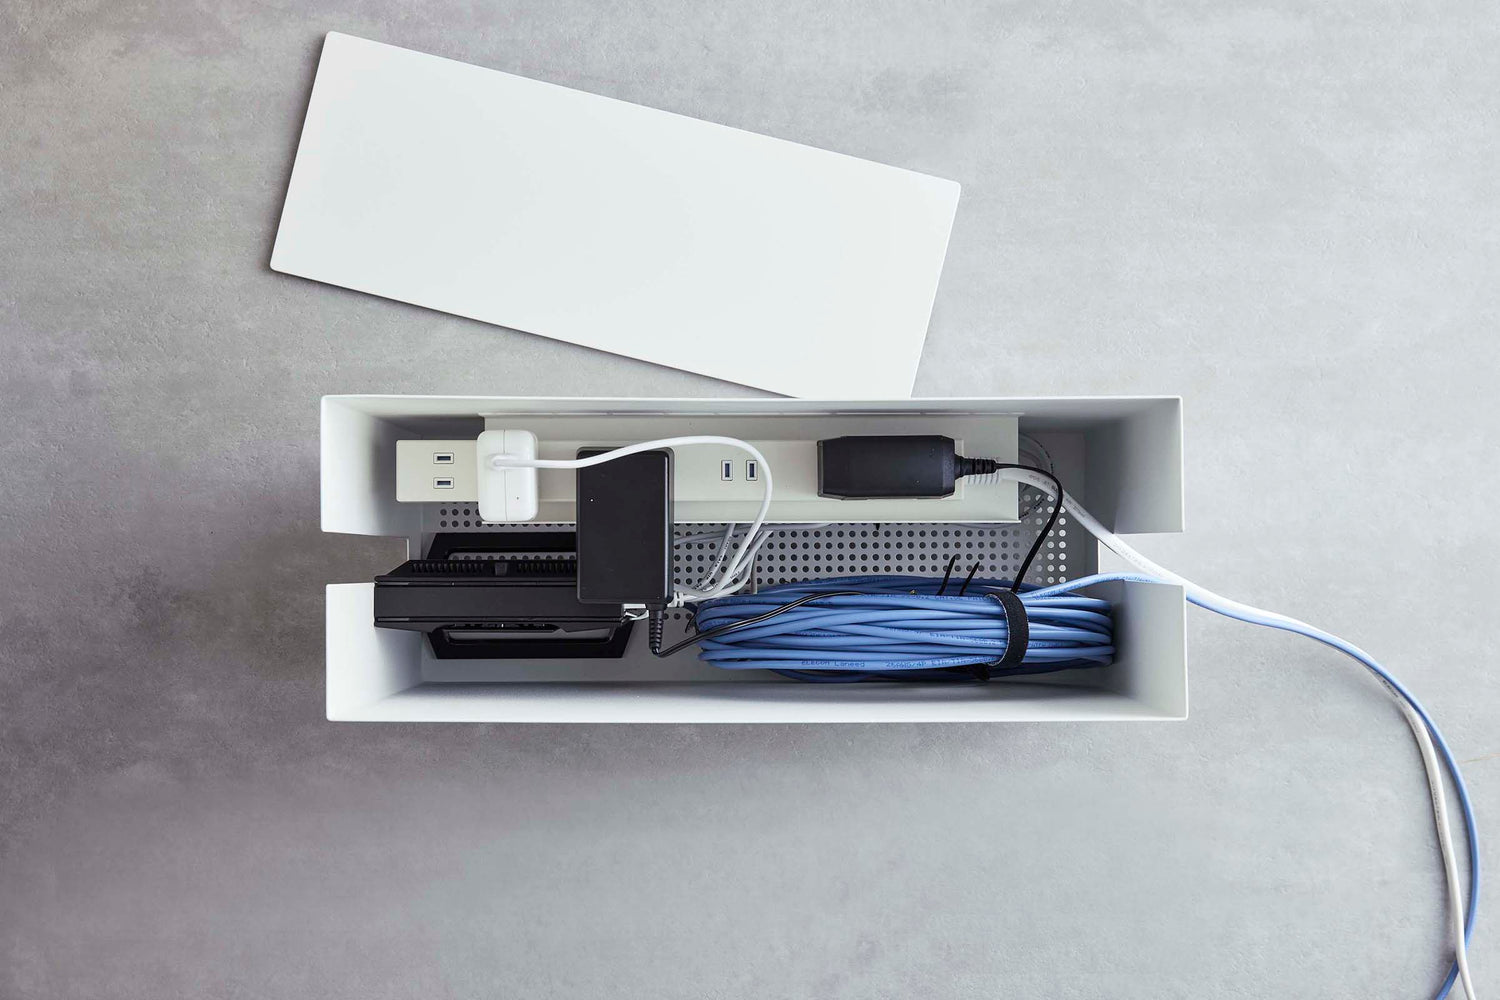 View 6 - Aerial view of white Rolling Cable Management Rack holding power strip by Yamazaki Home.